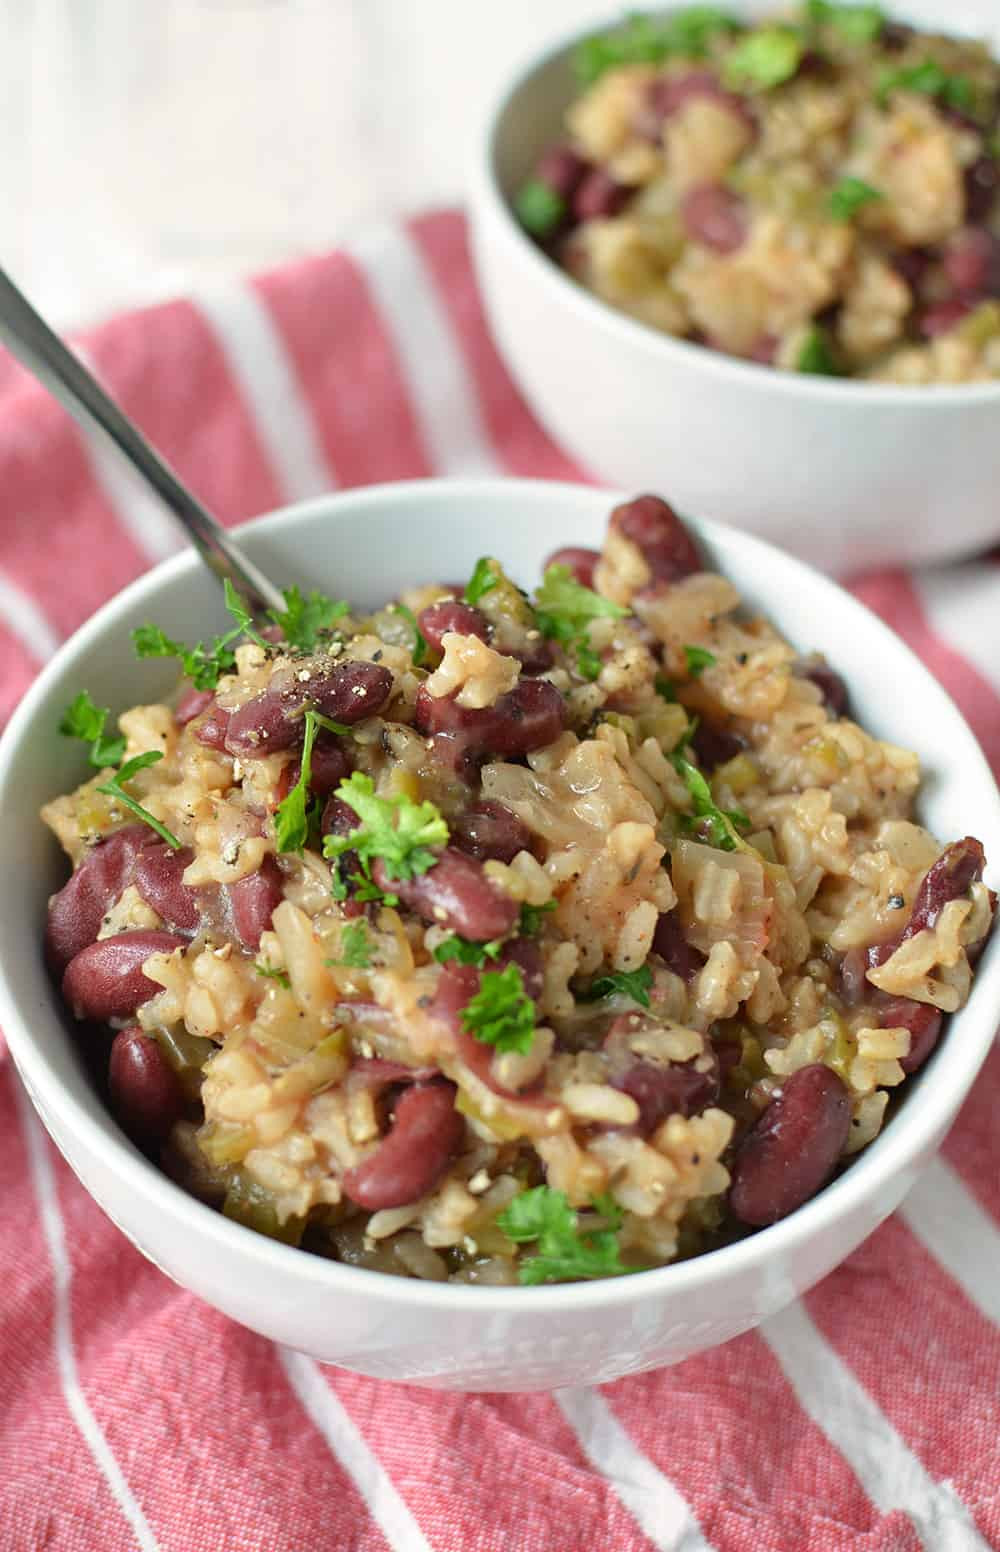 Red Beans And Rice Recipes Slow Cooker
 Slow Cooker Vegan Red Beans and Rice